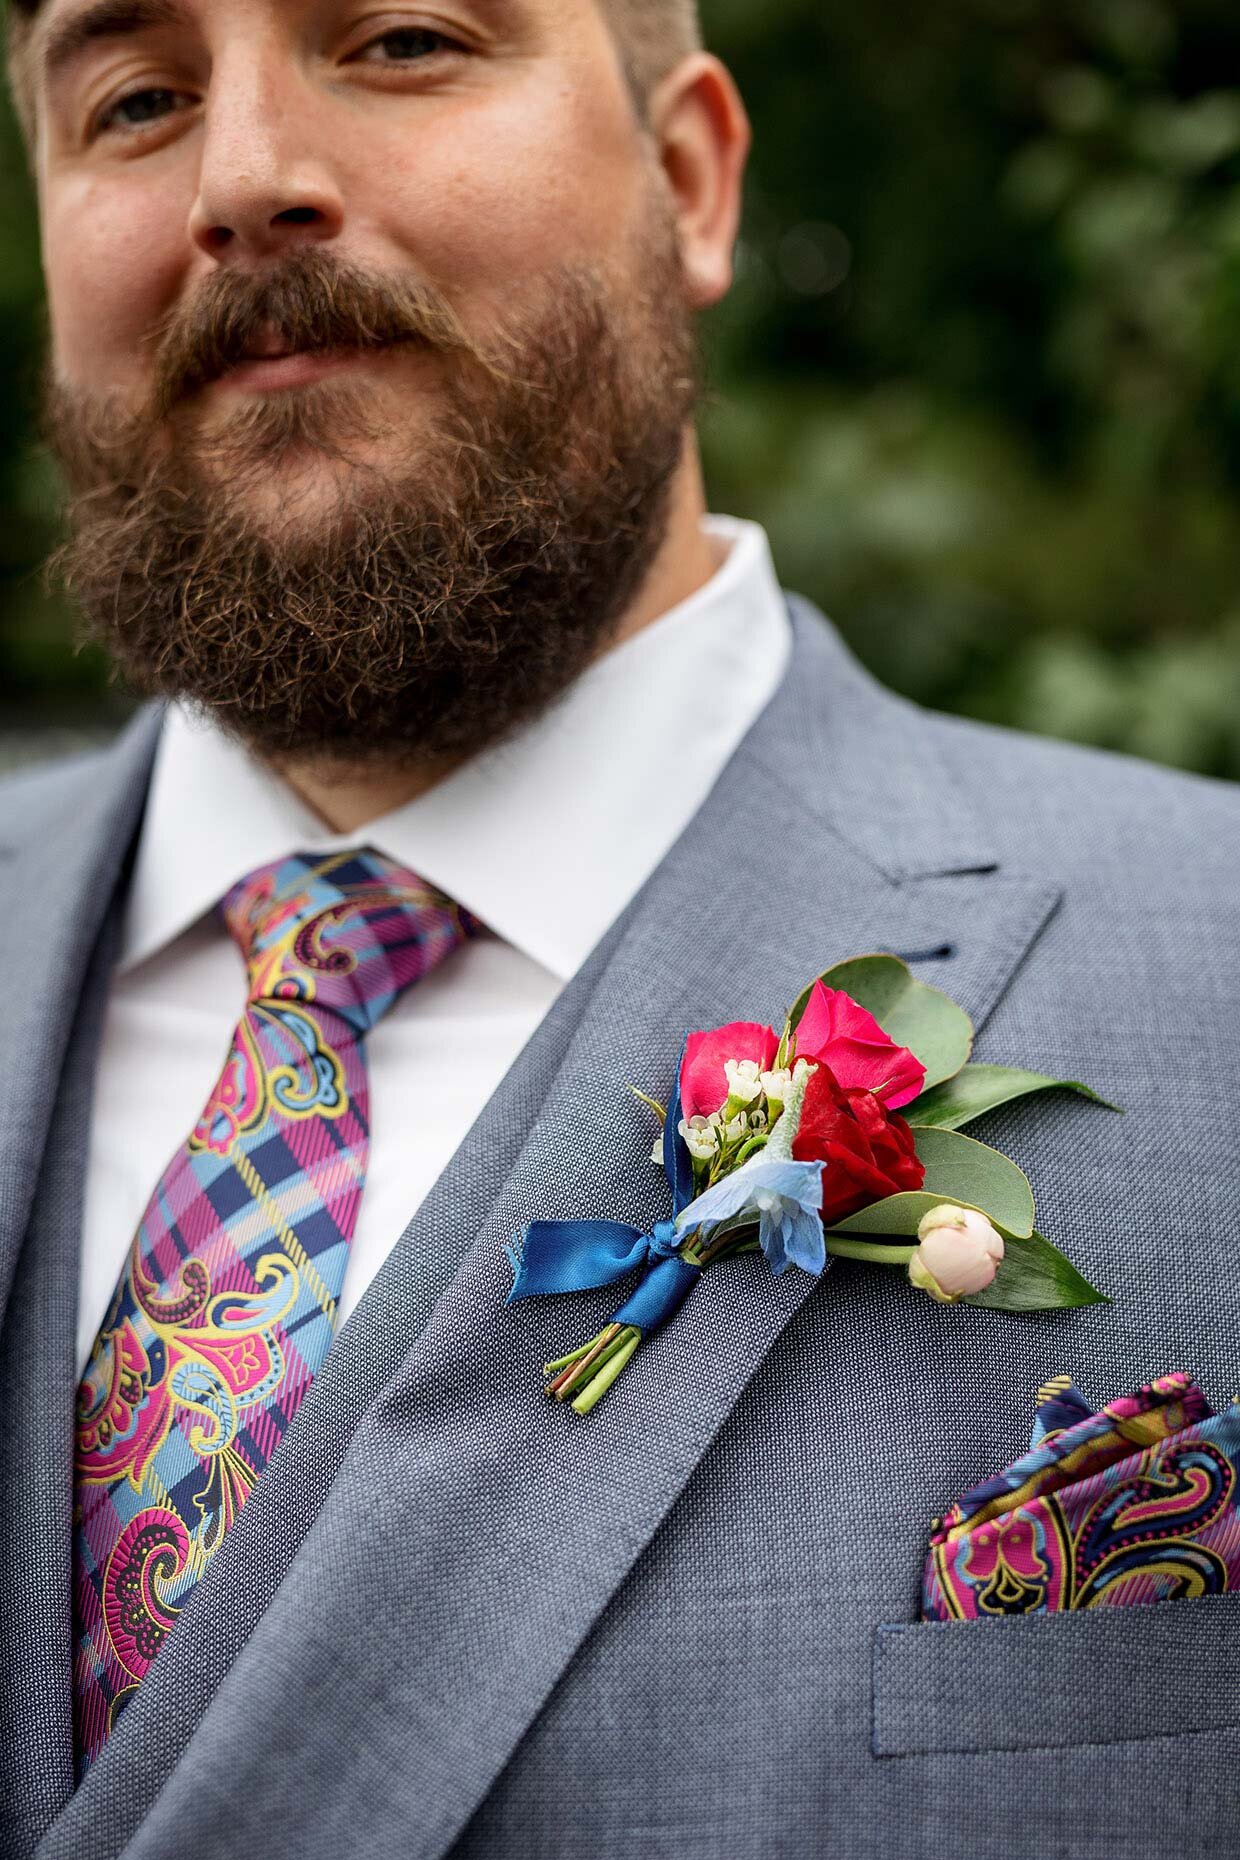 Groom's boutonniere and tie in red and blue